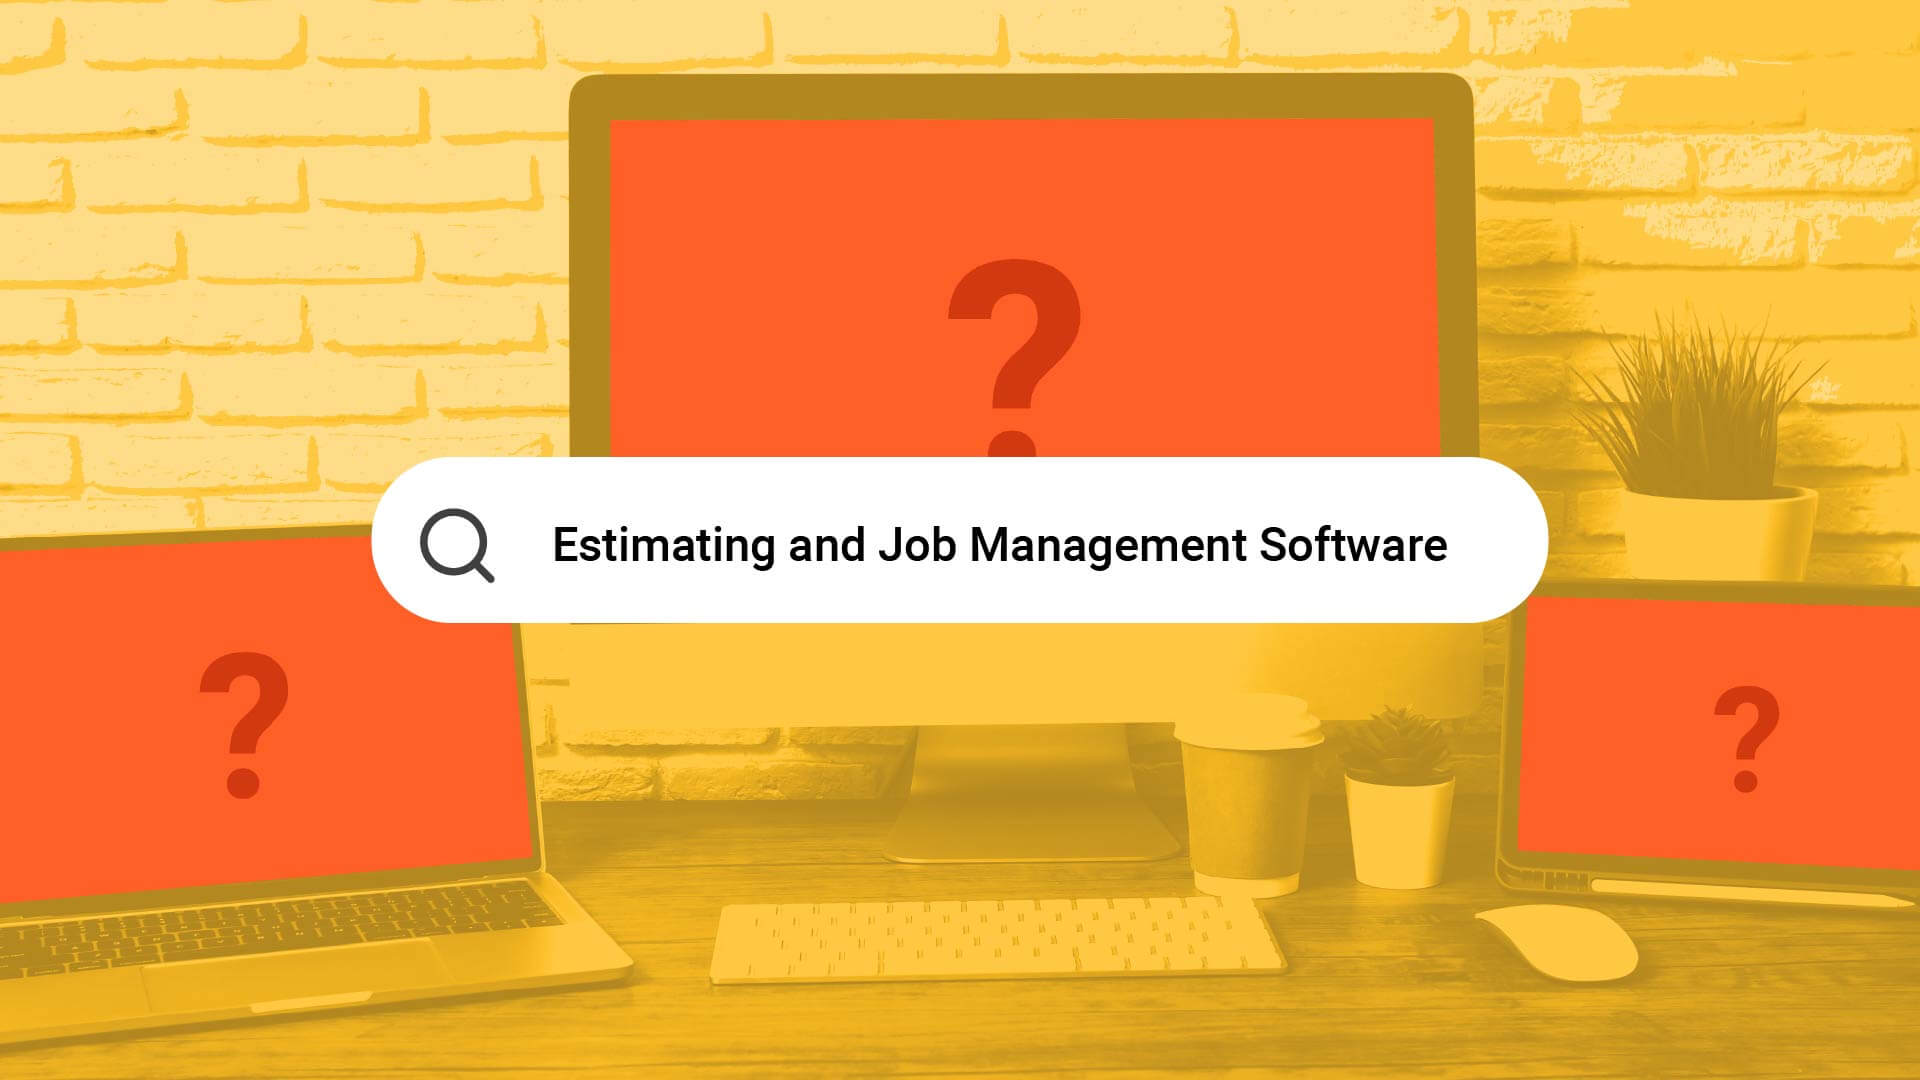 Searching For Estimating and Job Management Software